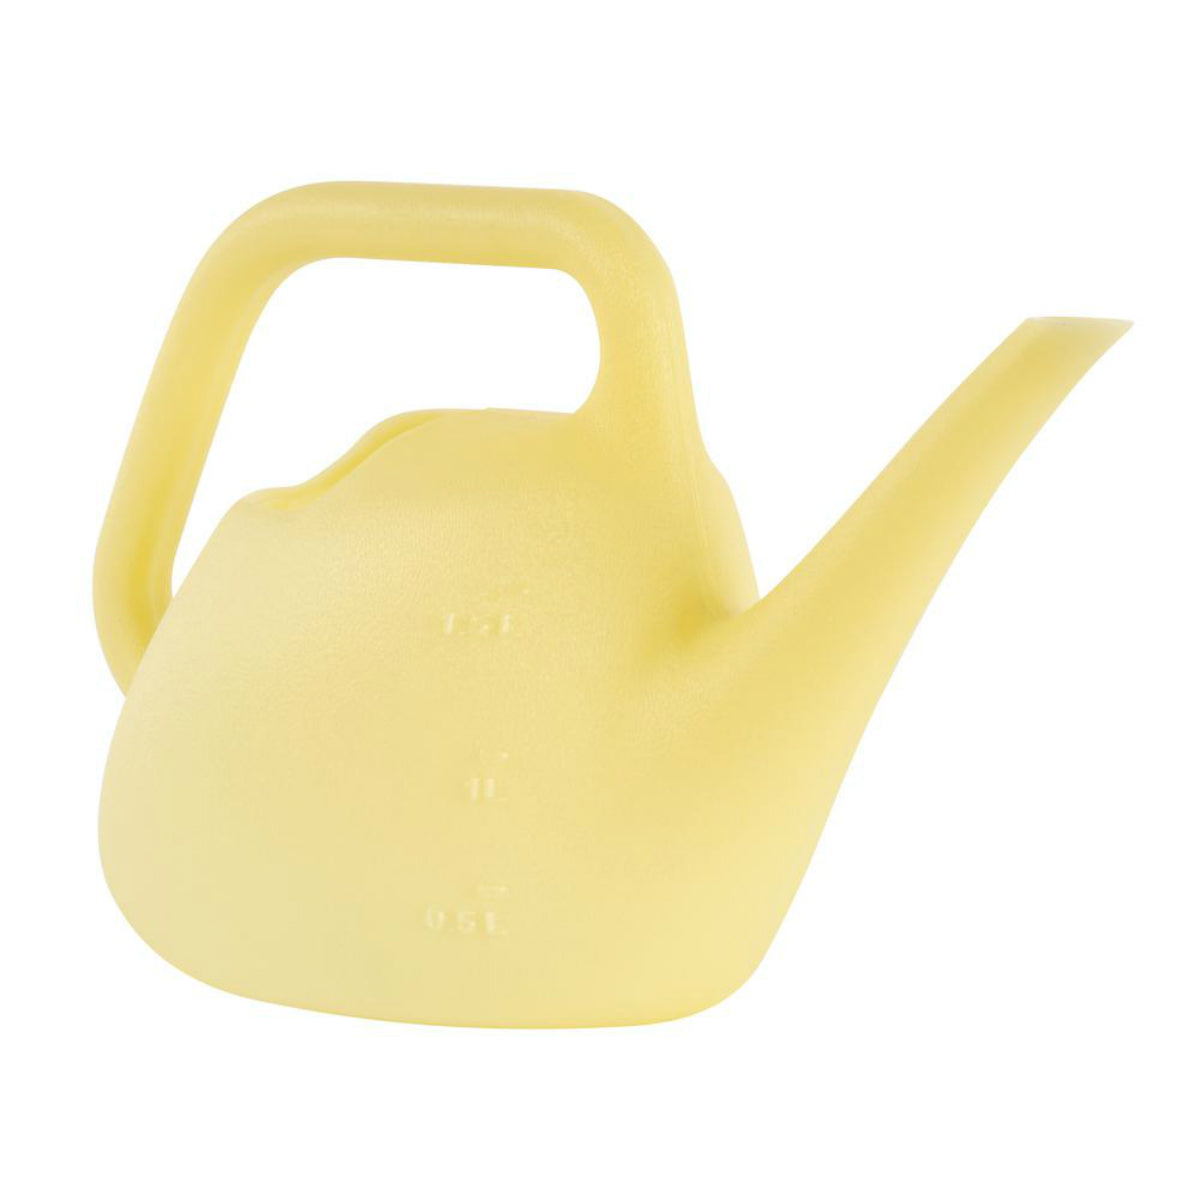 Bloem 434157-4004 Translucent Plastic Watering Can, Goldfinch Yellow, 1.5 Liter